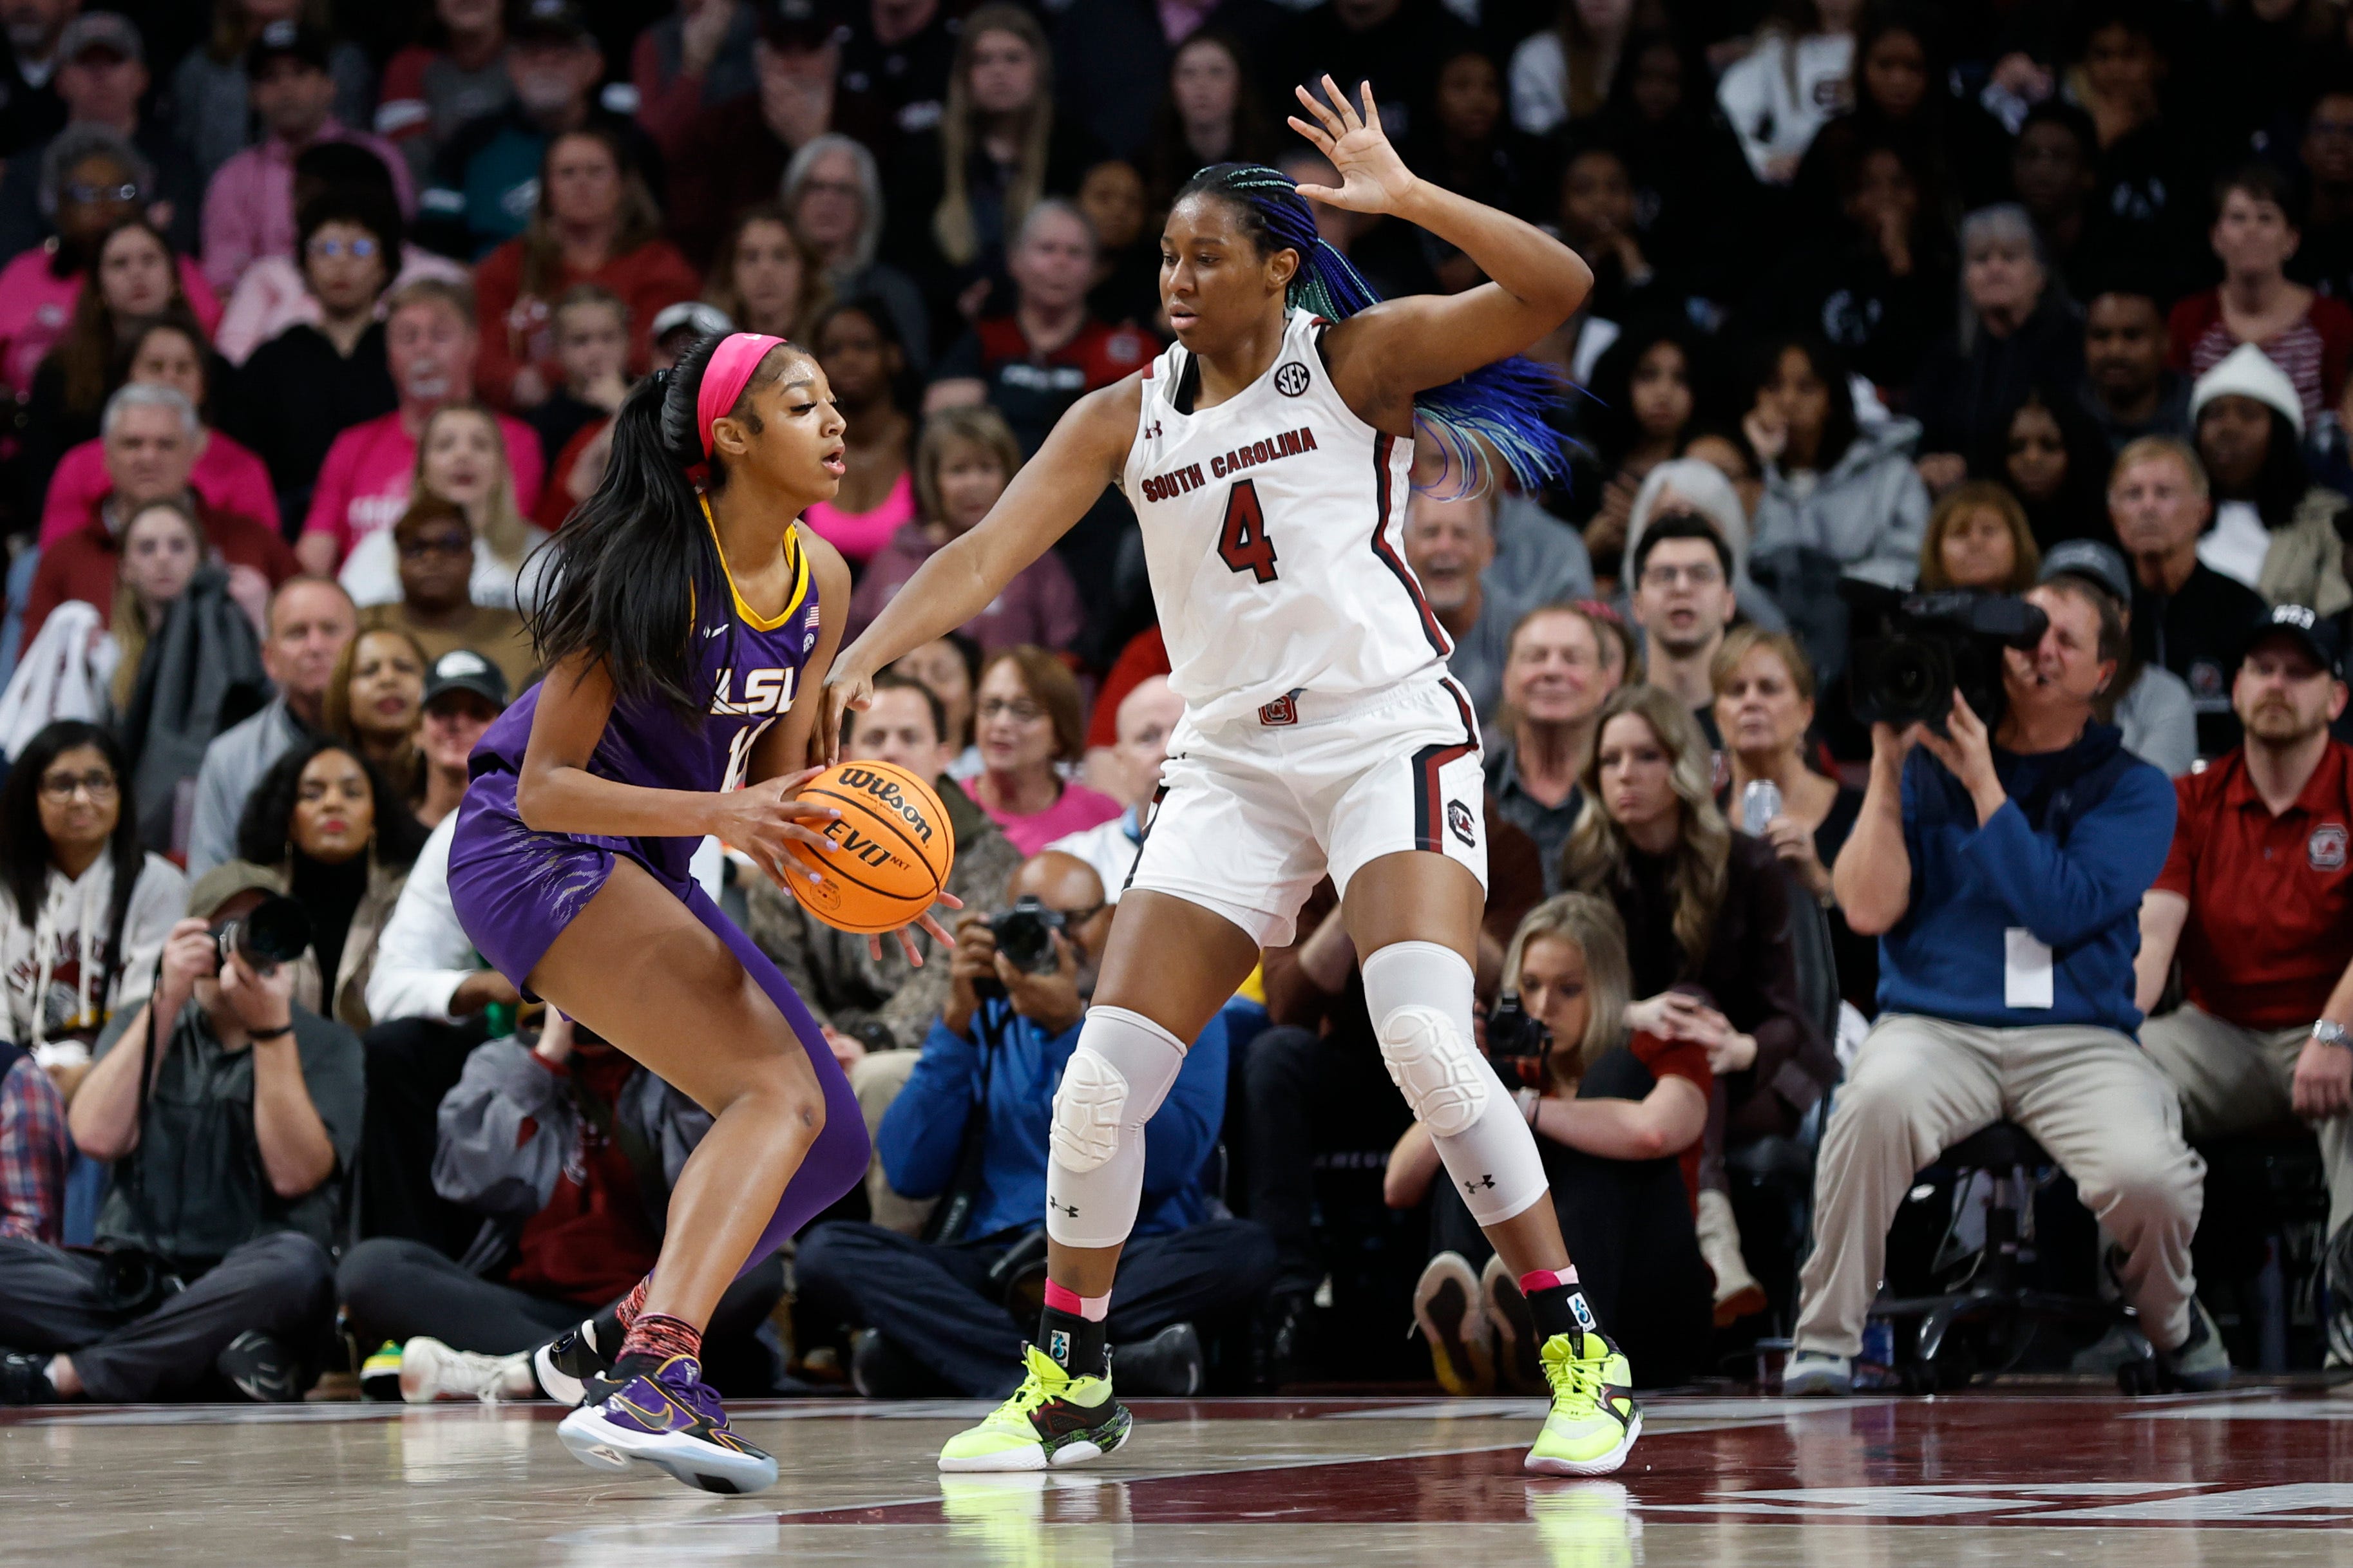 LSU forward Angel Reese, left, looks to pass against South Carolina forward Aliyah Boston (4) during the first half of an NCAA college basketball game in Columbia, S.C., Sunday, Feb. 12, 2023. South Carolina won 88-64. (AP Photo/Nell Redmond)